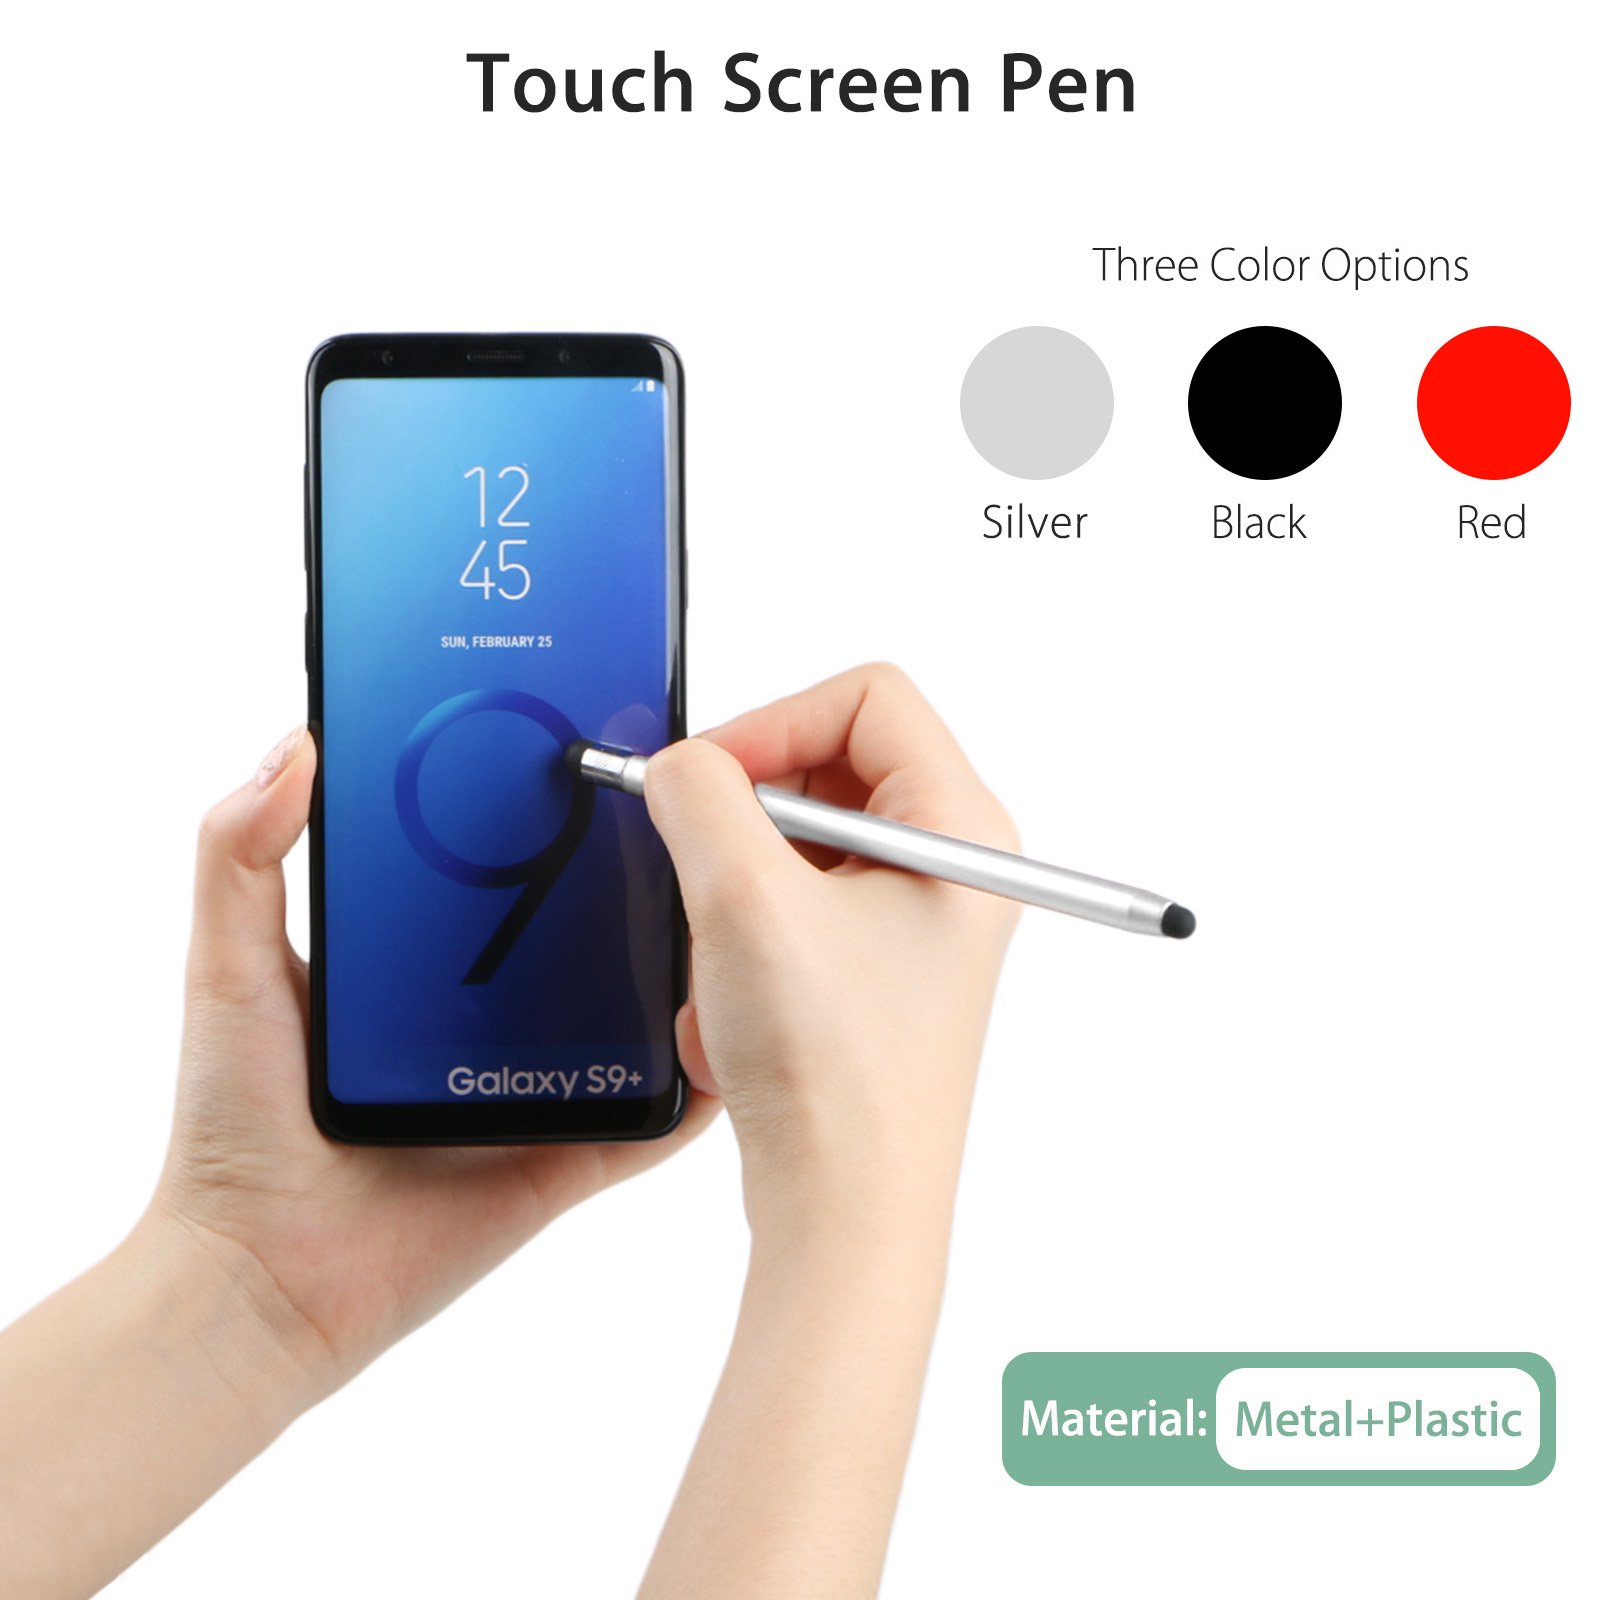 Stylus Pen, EEEkit 3 Pcs 2 in 1 Universal Touch Screen Pen Slim Replacement Capacitive Stylus Pen For  iPhone iPad Samsung Tablet Smartphone PC and More Touch Screens Devices - image 2 of 8